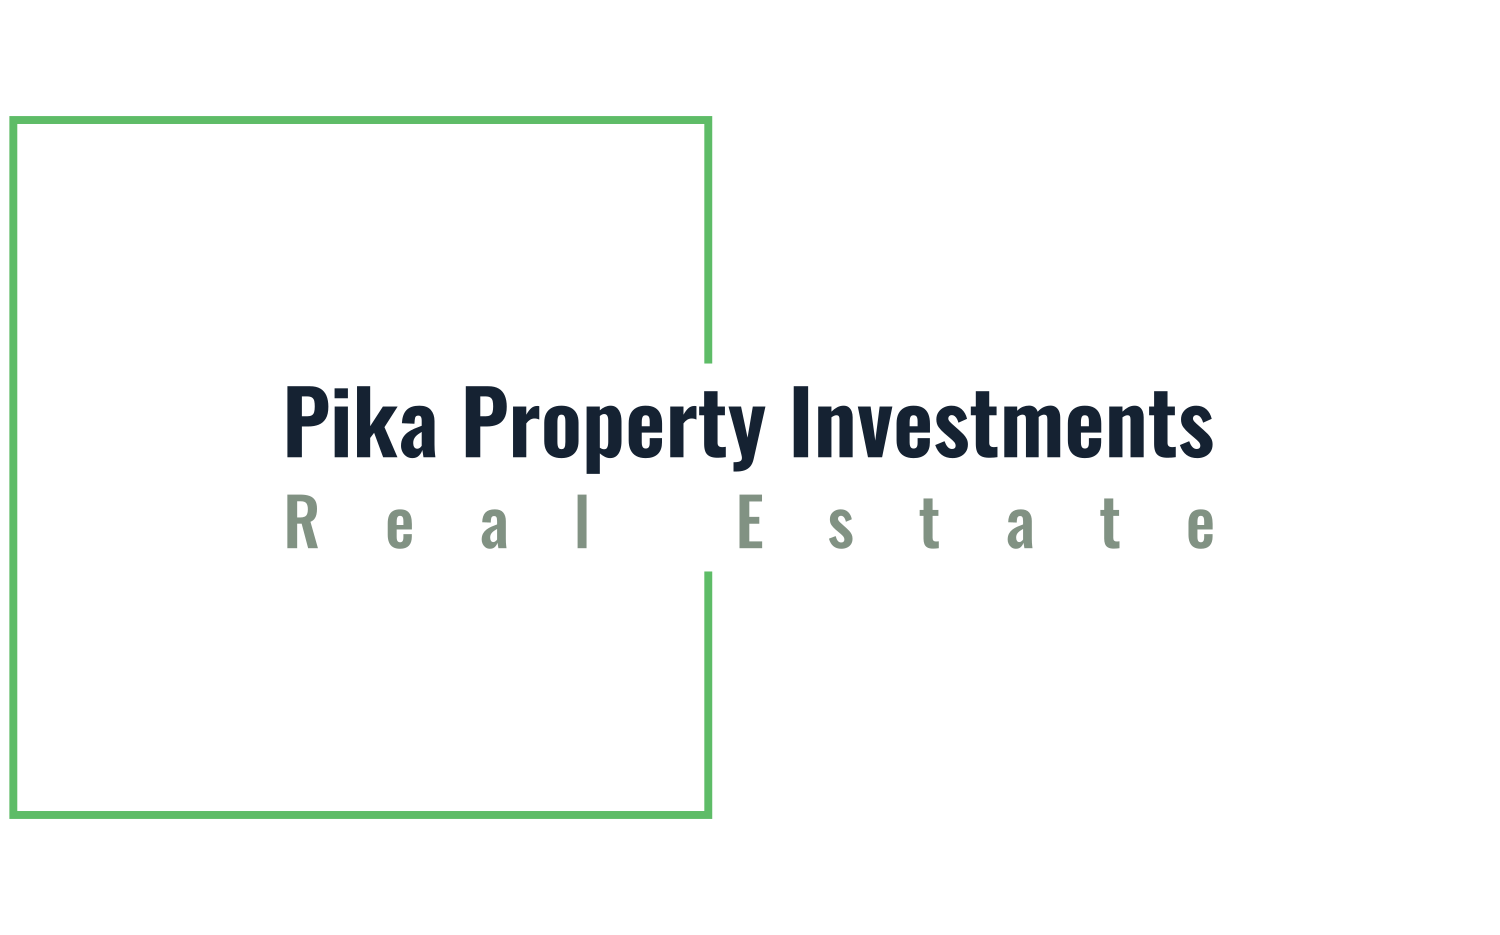 Pika Property Investments